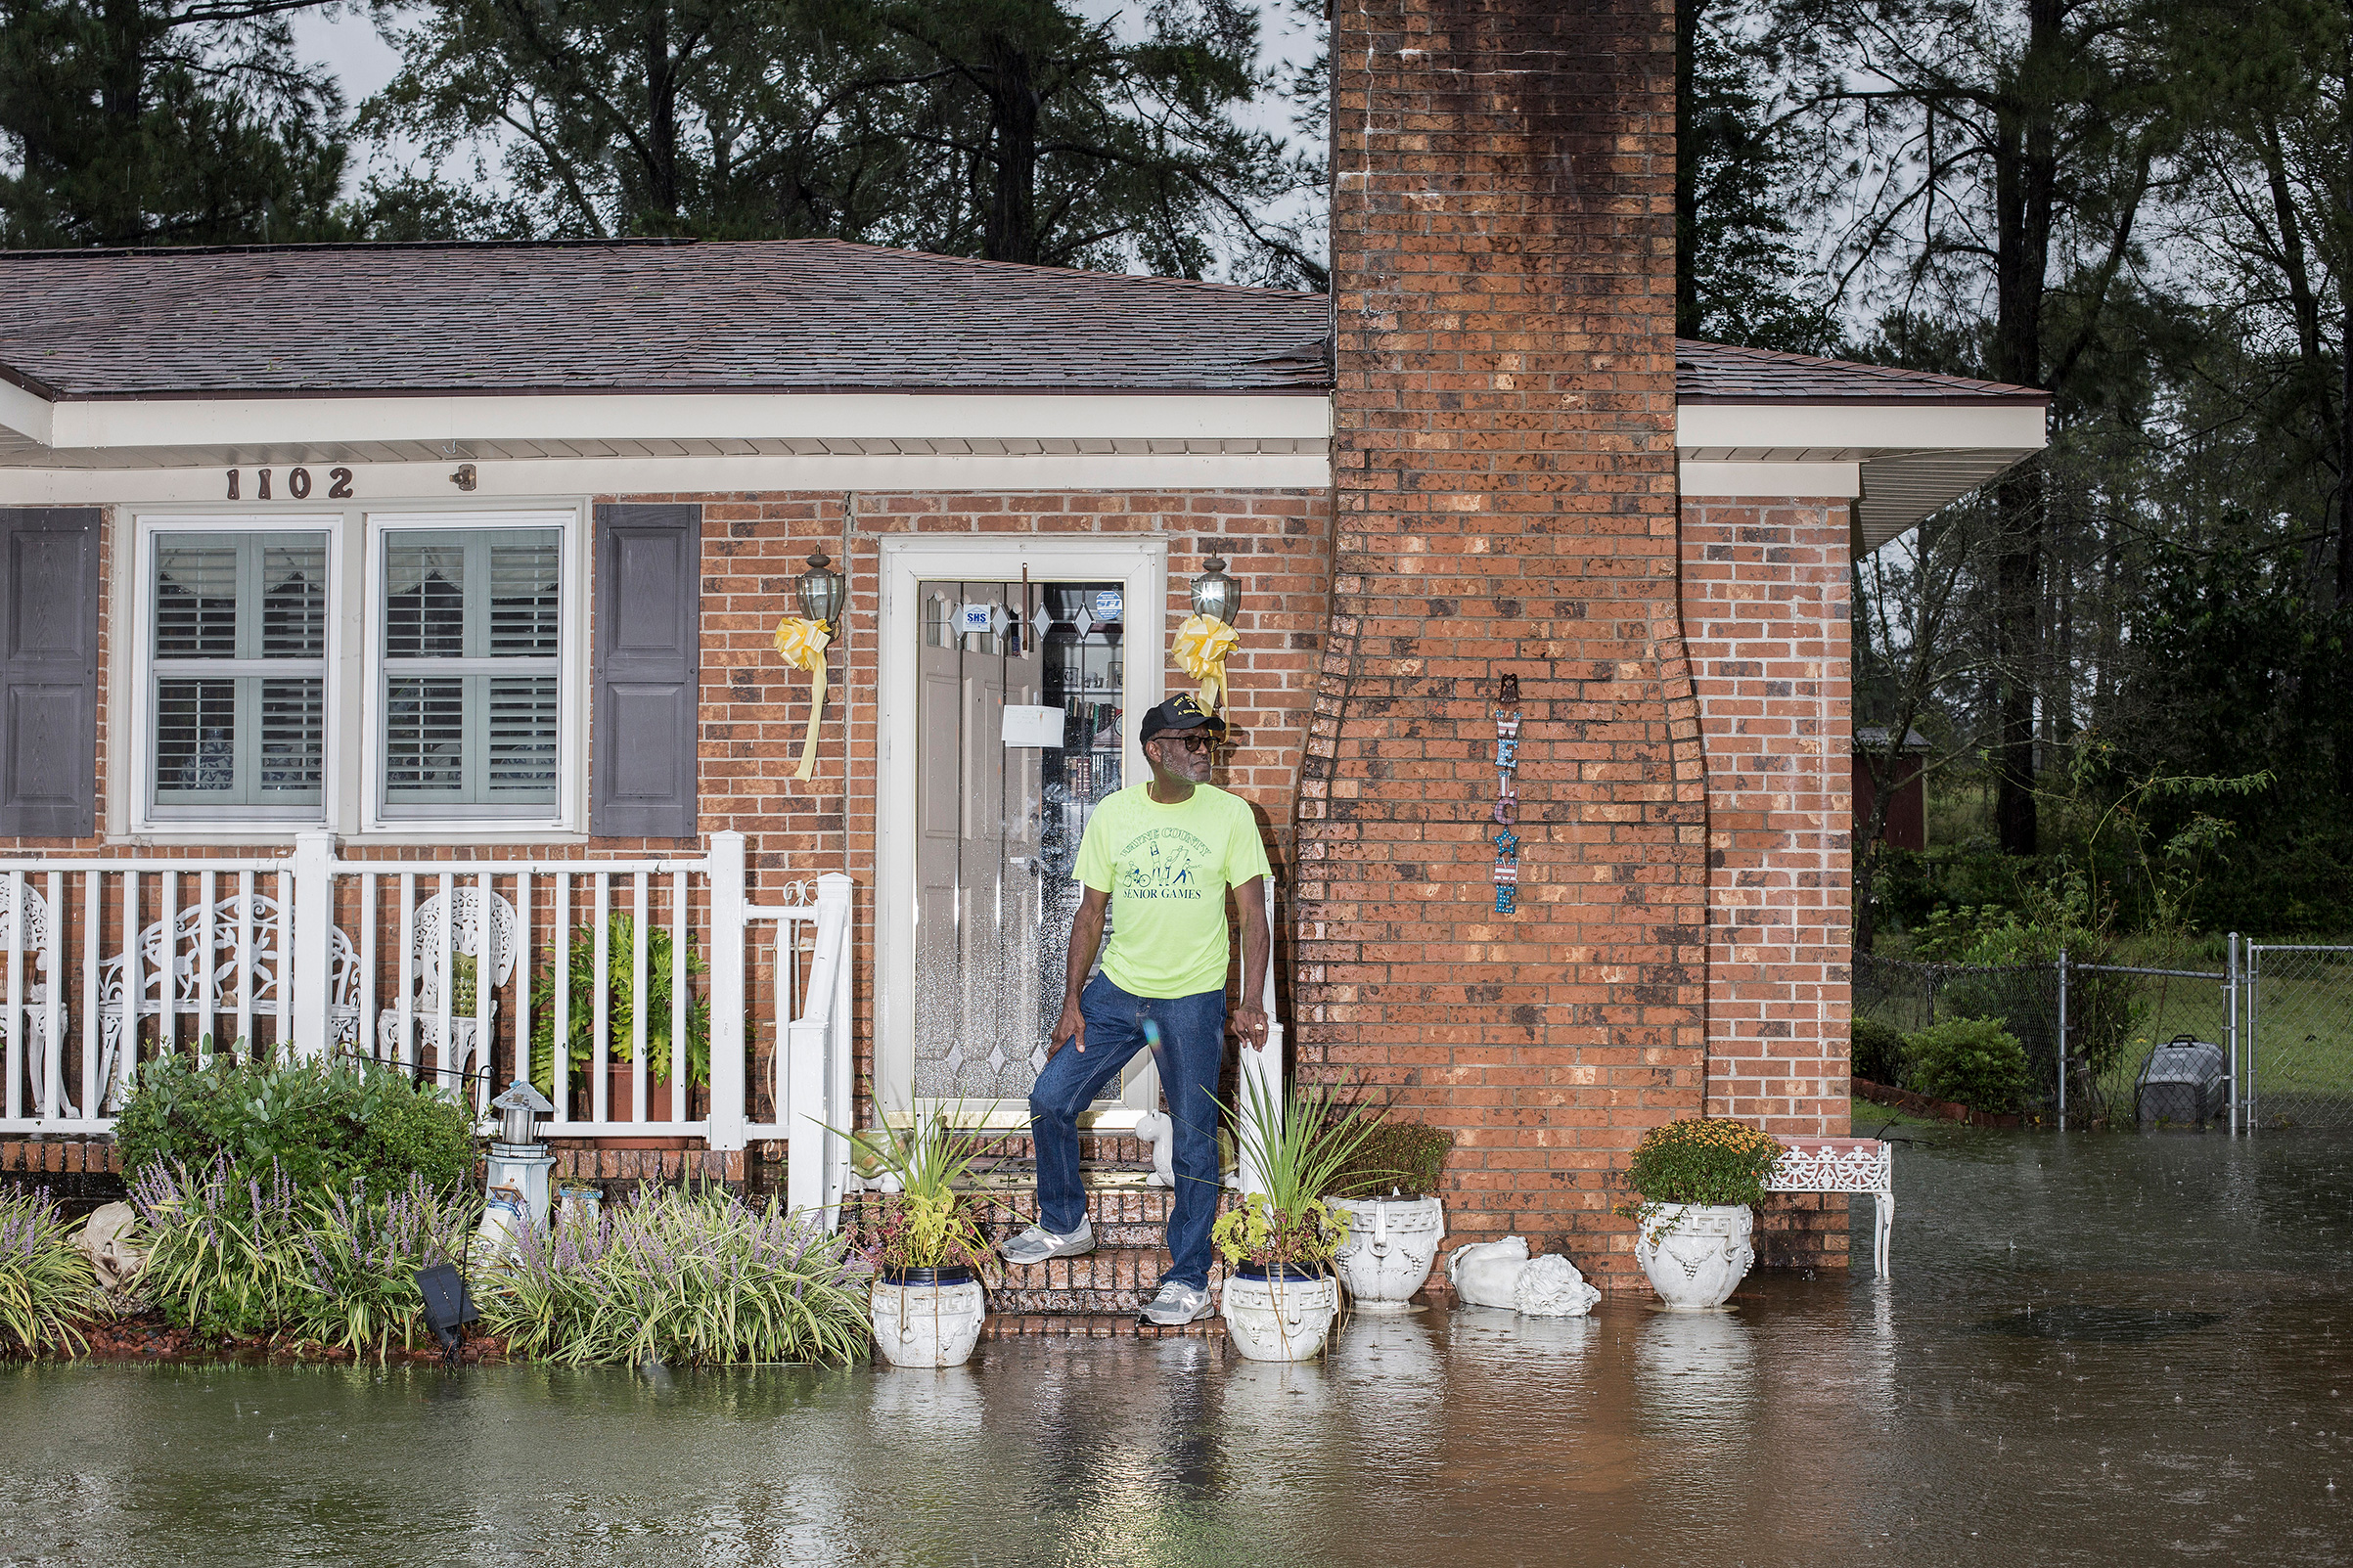 Coy Coley in front of his home in Goldsboro, N.C., after his neighborhood was flooded due to rainfall from Hurricane Florence on Sept. 15. (Bryan Anselm—Redux for TIME)